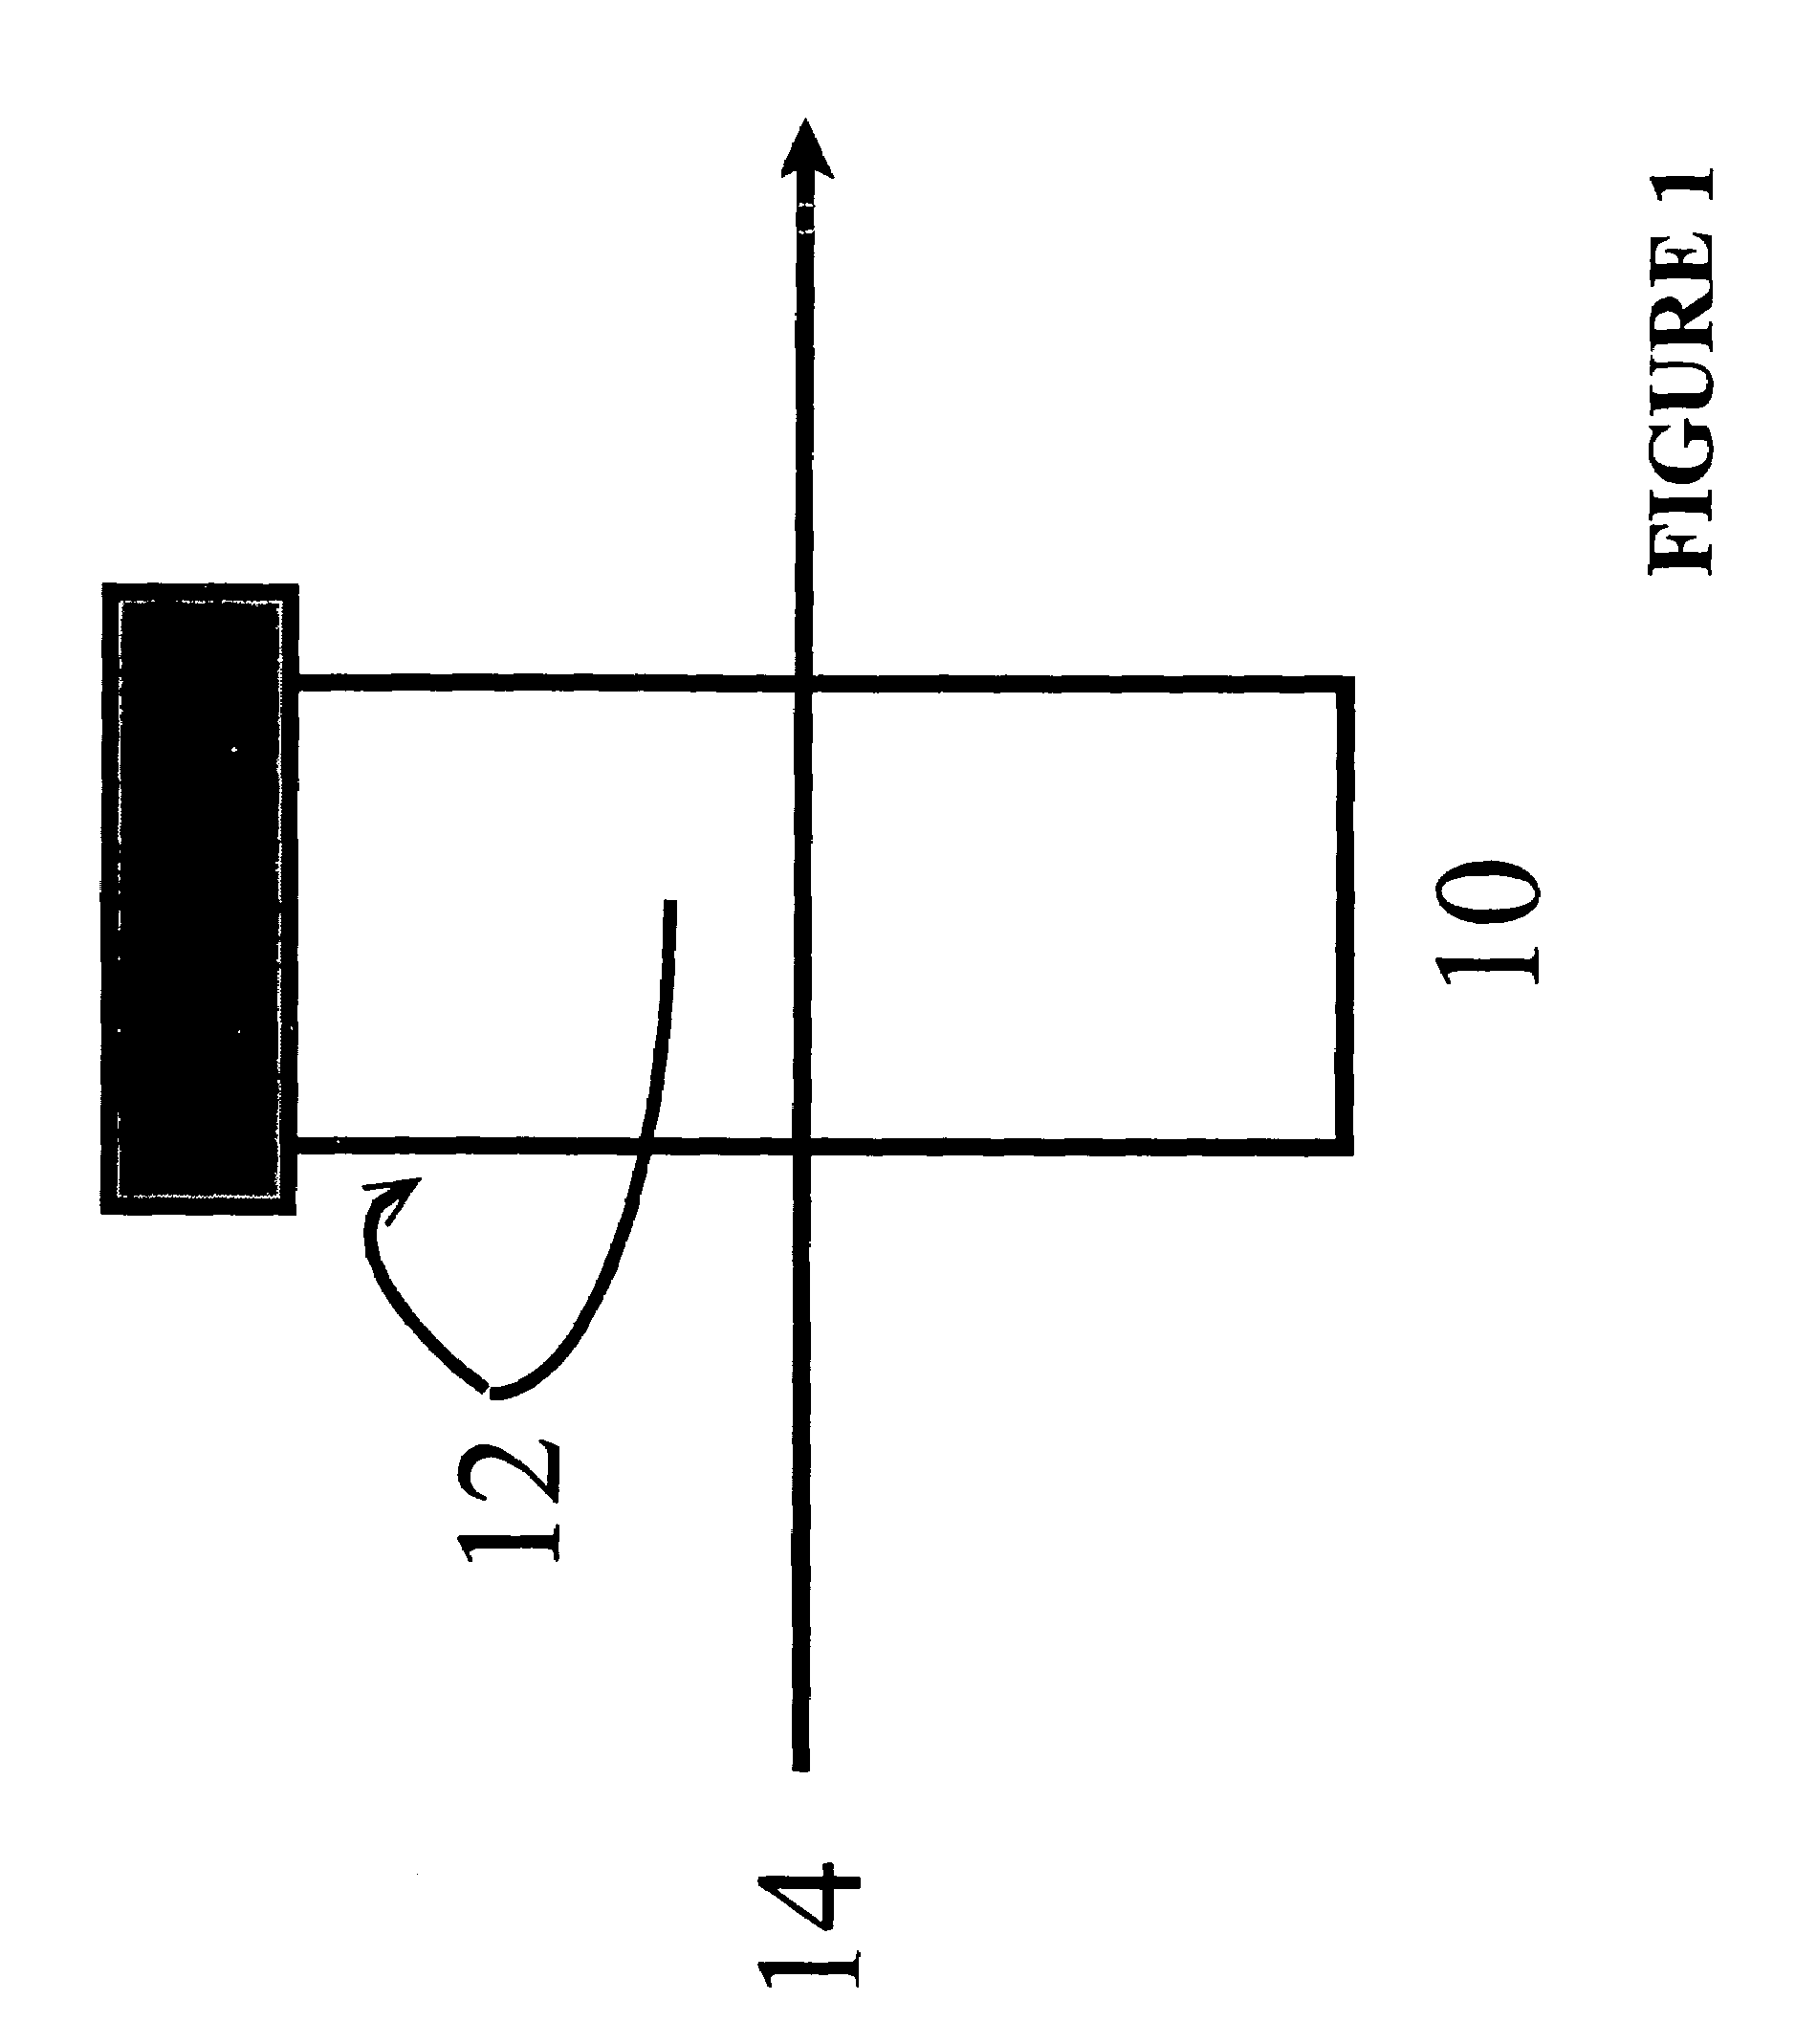 Optical absorbance sensitivity and reliability improvement via rotation of sample container